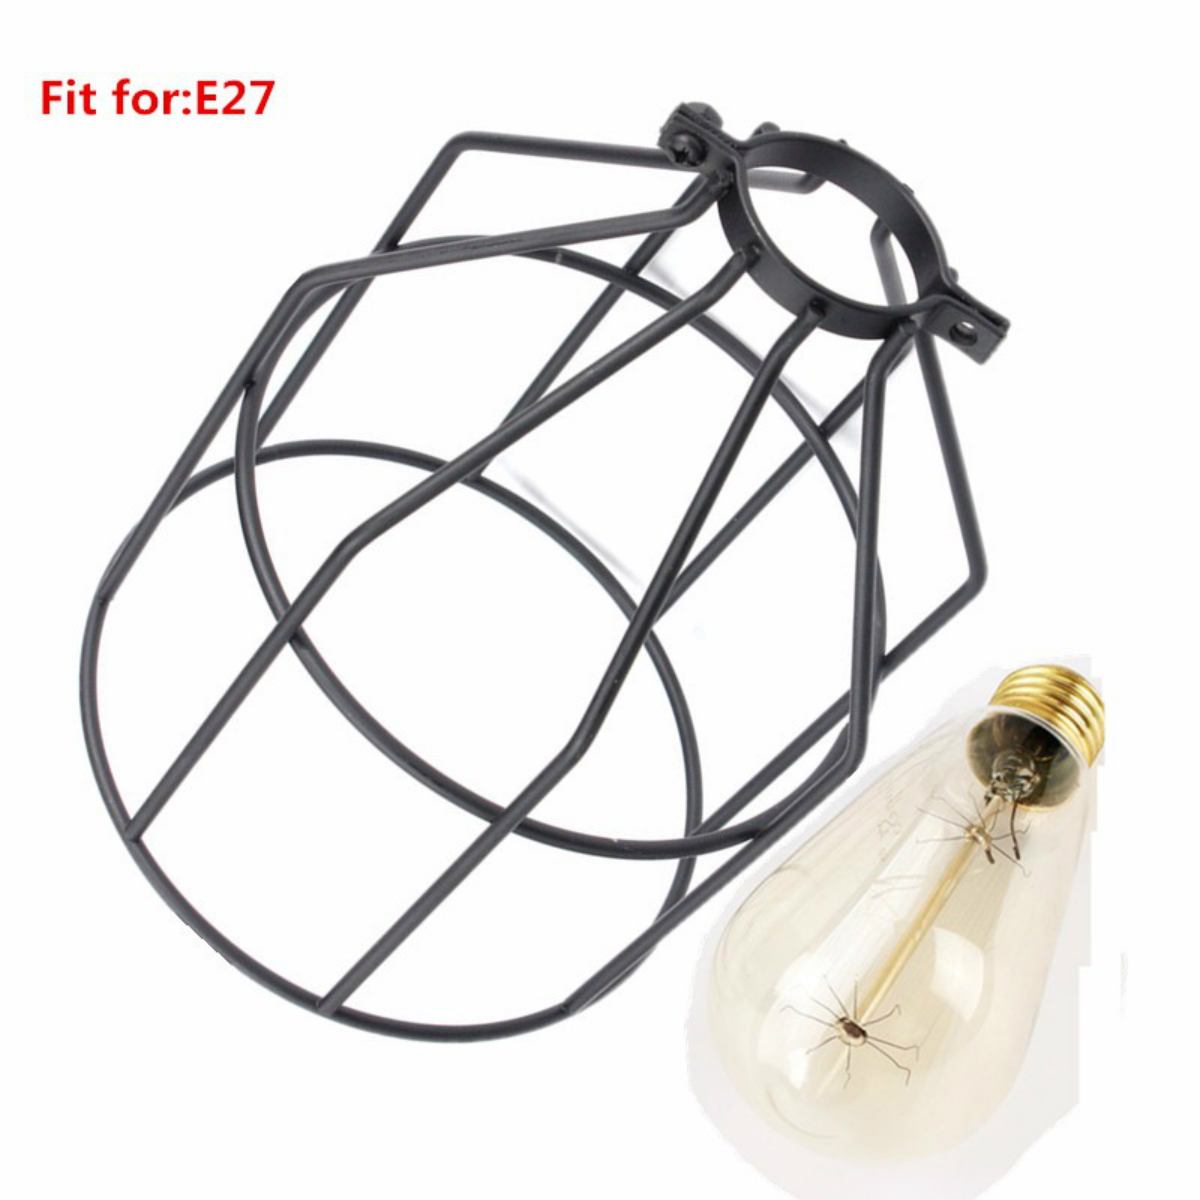 E27 Vintage Steel Bulb Guard Clamp On Metal Lamp Cage Retro Trouble Light Industrial Lamp Covers Lamp Shades Lanterns